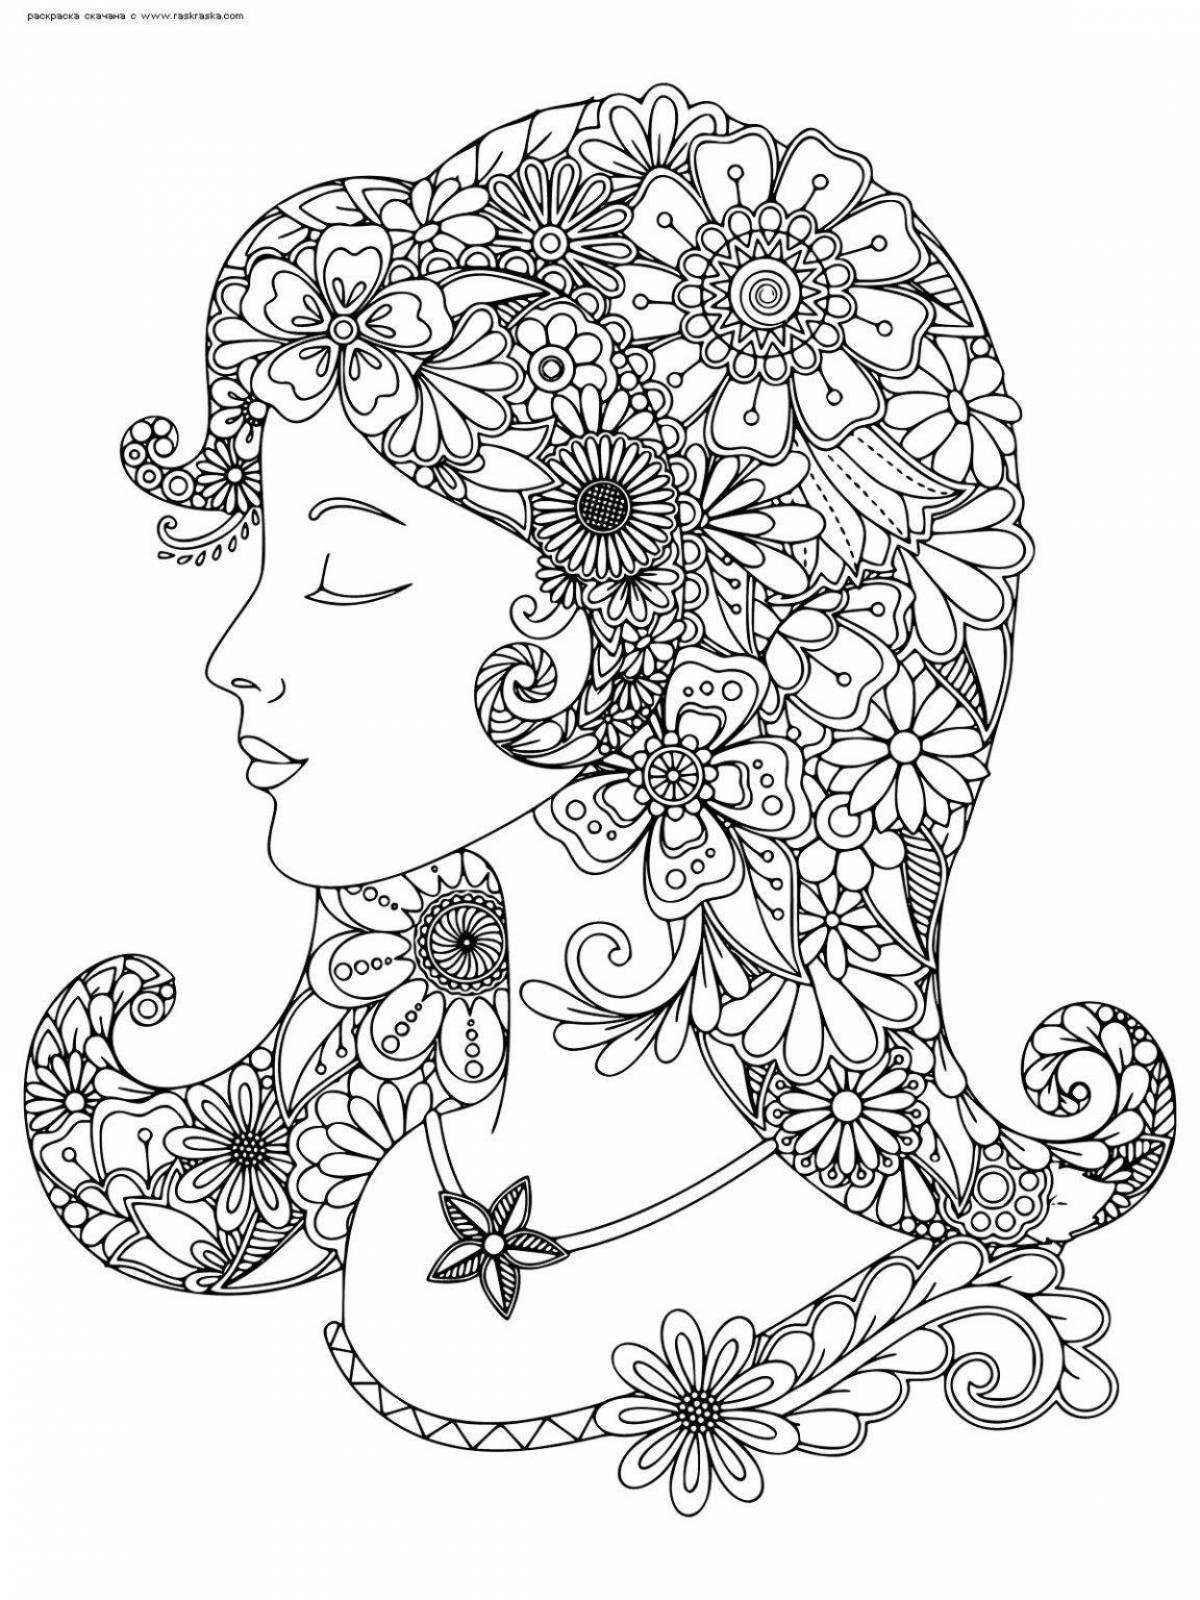 Delightful anti-stress coloring book for women